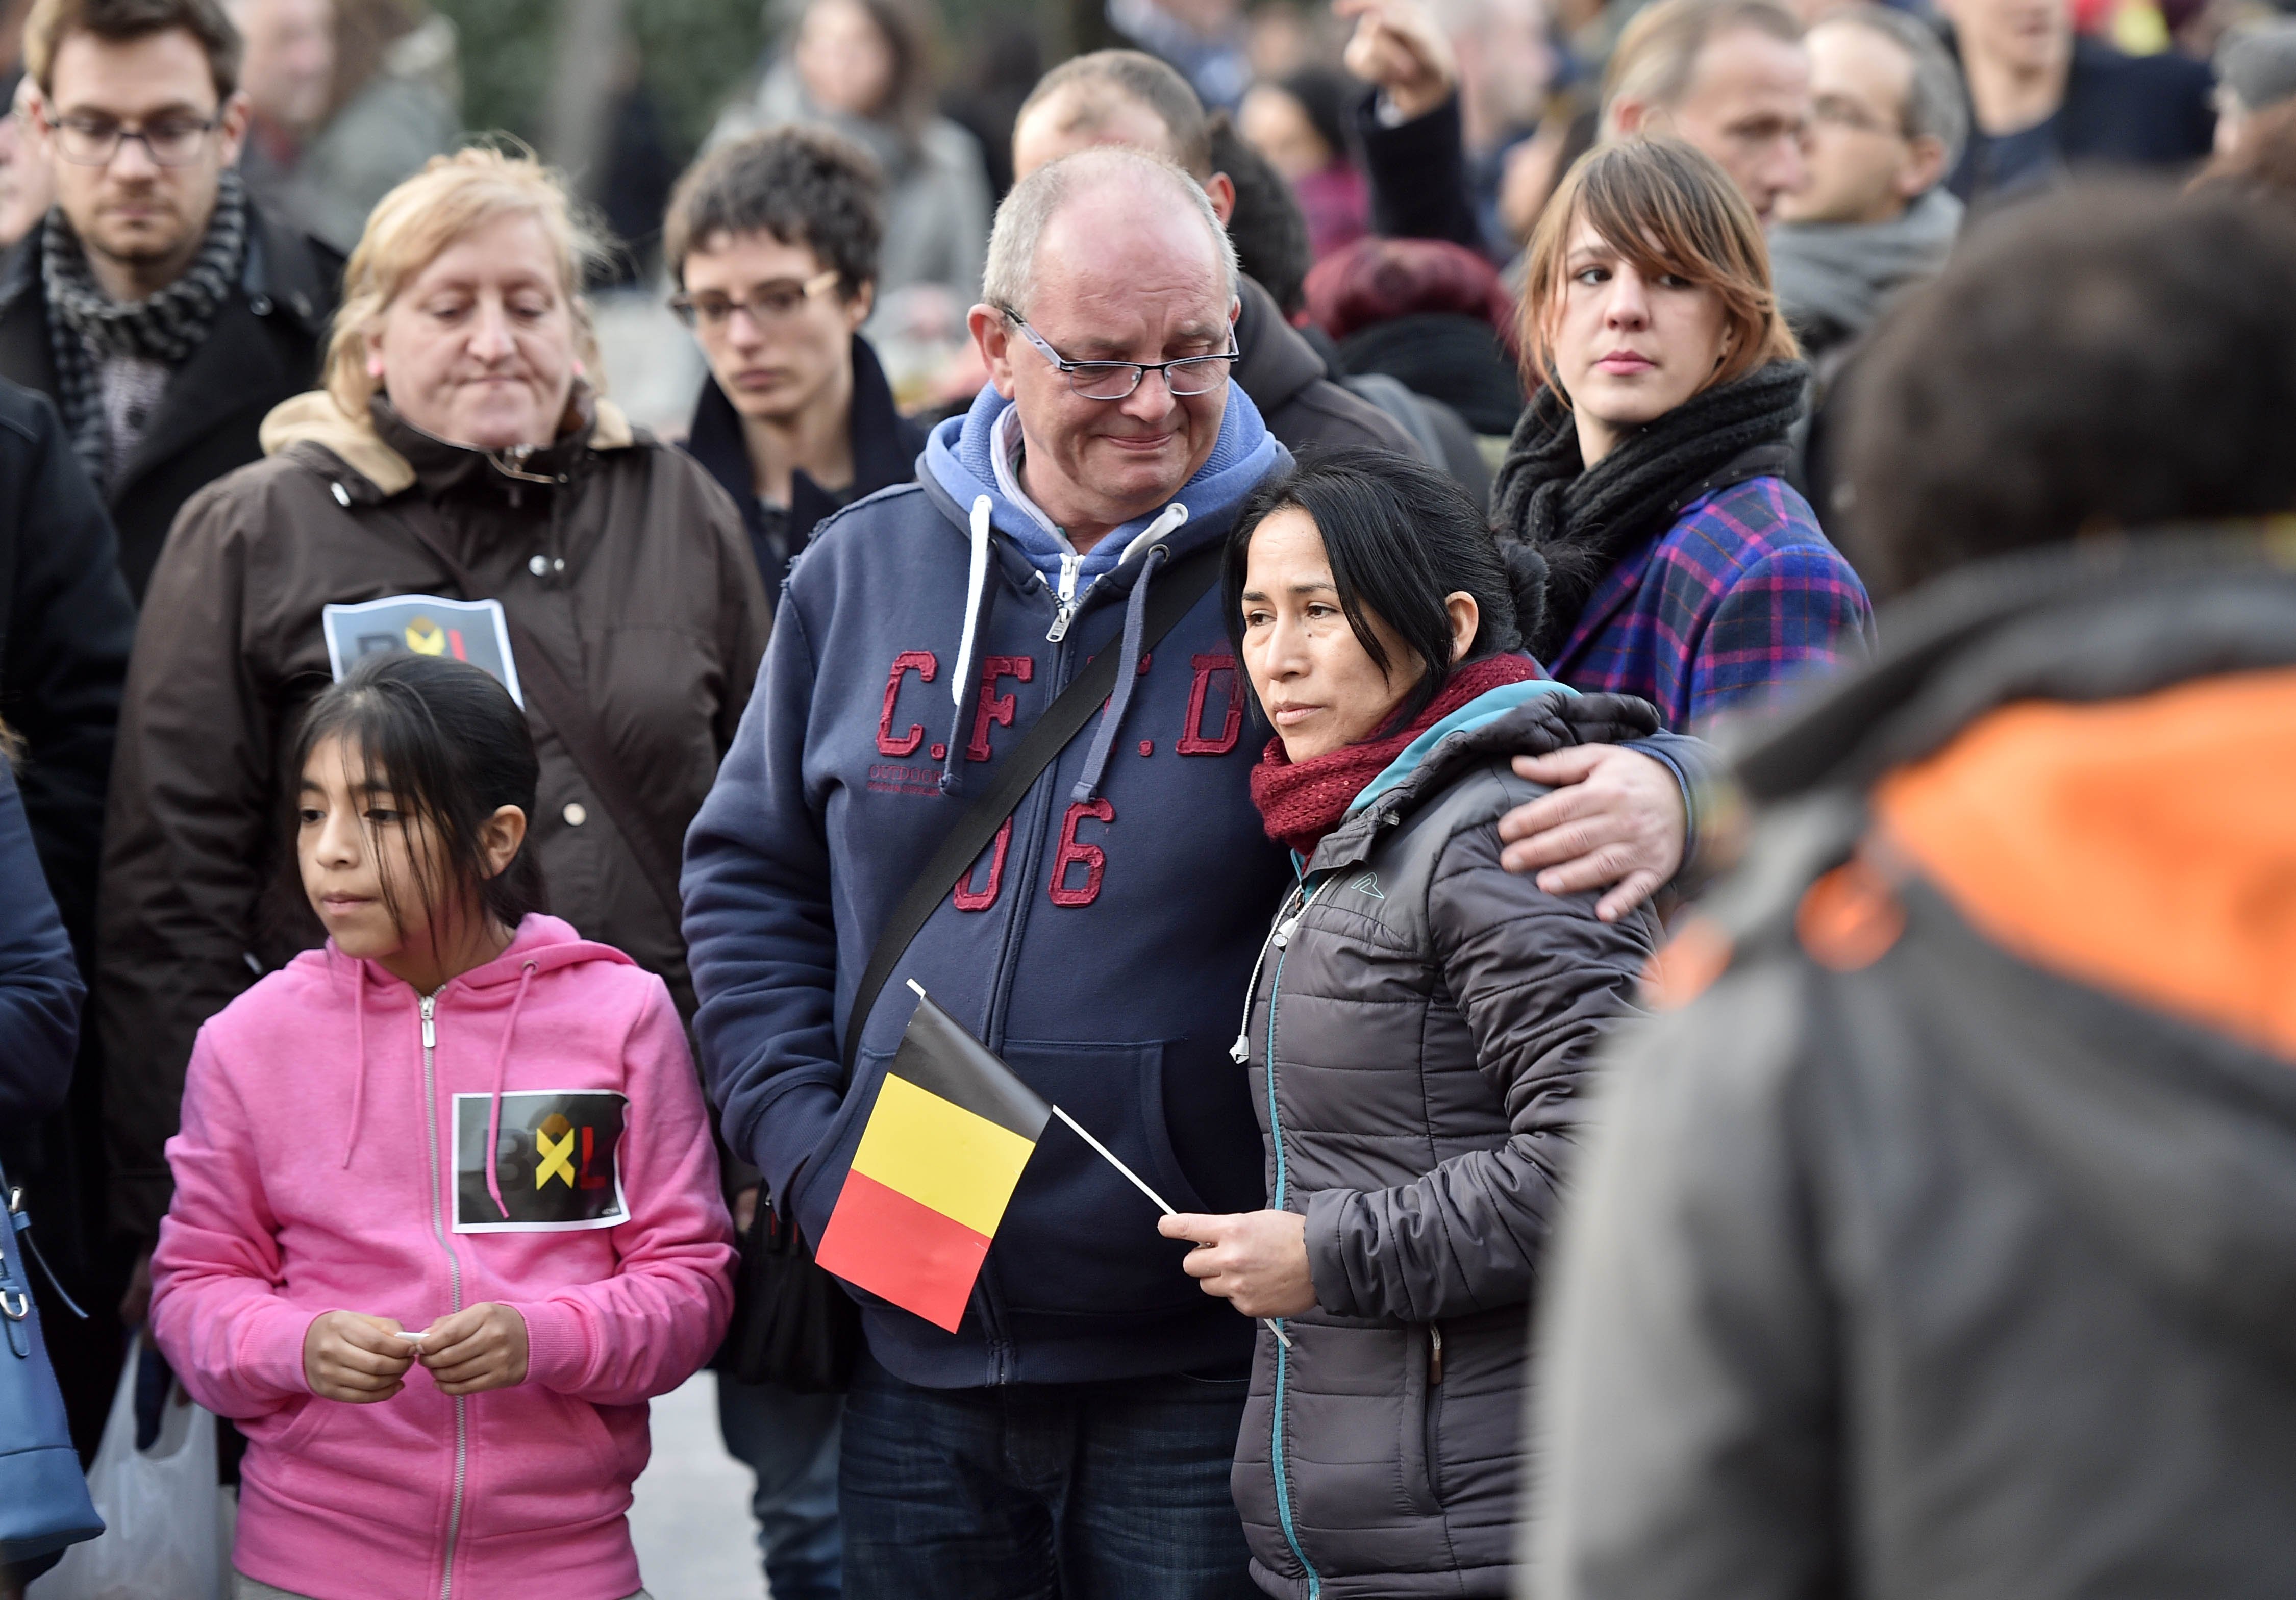 People mourn for the victims at Place de la Bourse in the center of Brussels, on March 22, 2016. (Martin Meissner—AP)